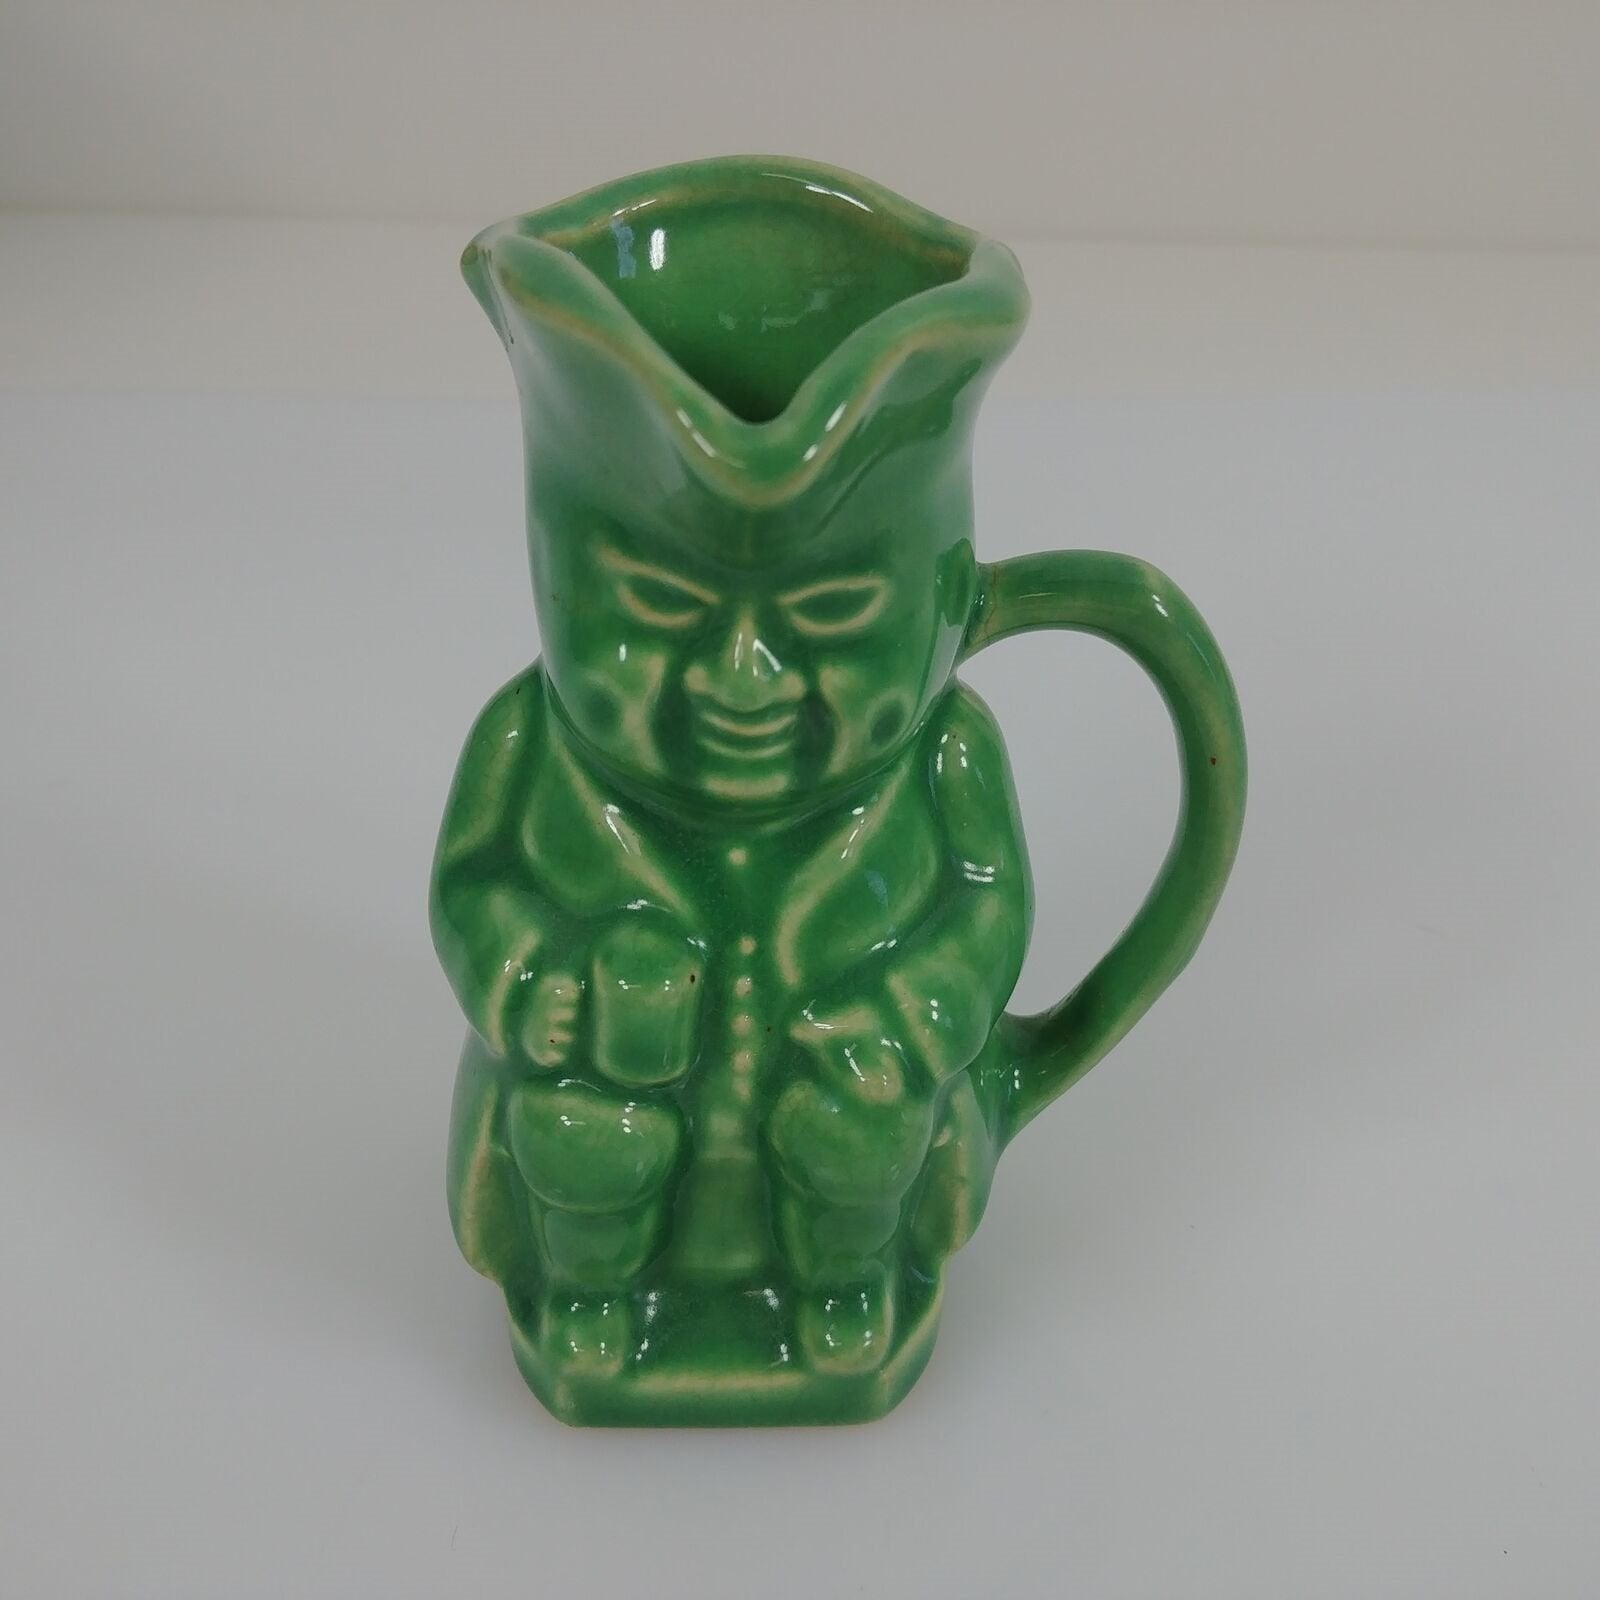 Colonial Man Creamer Pitcher Green With Handle Approx 4" Tall